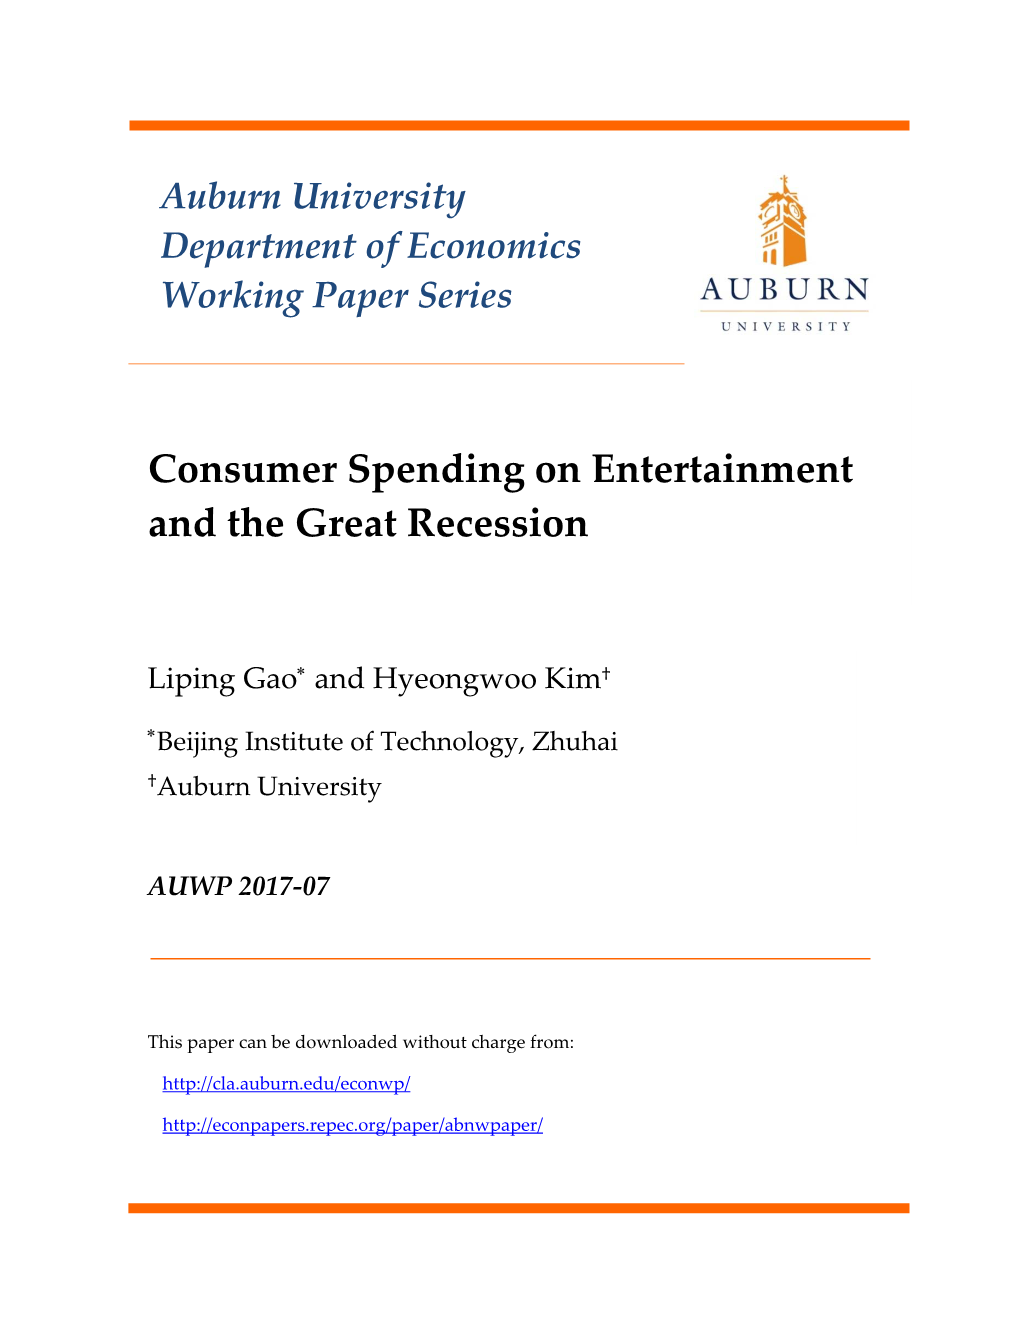 Consumer Spending on Entertainment and the Great Recession